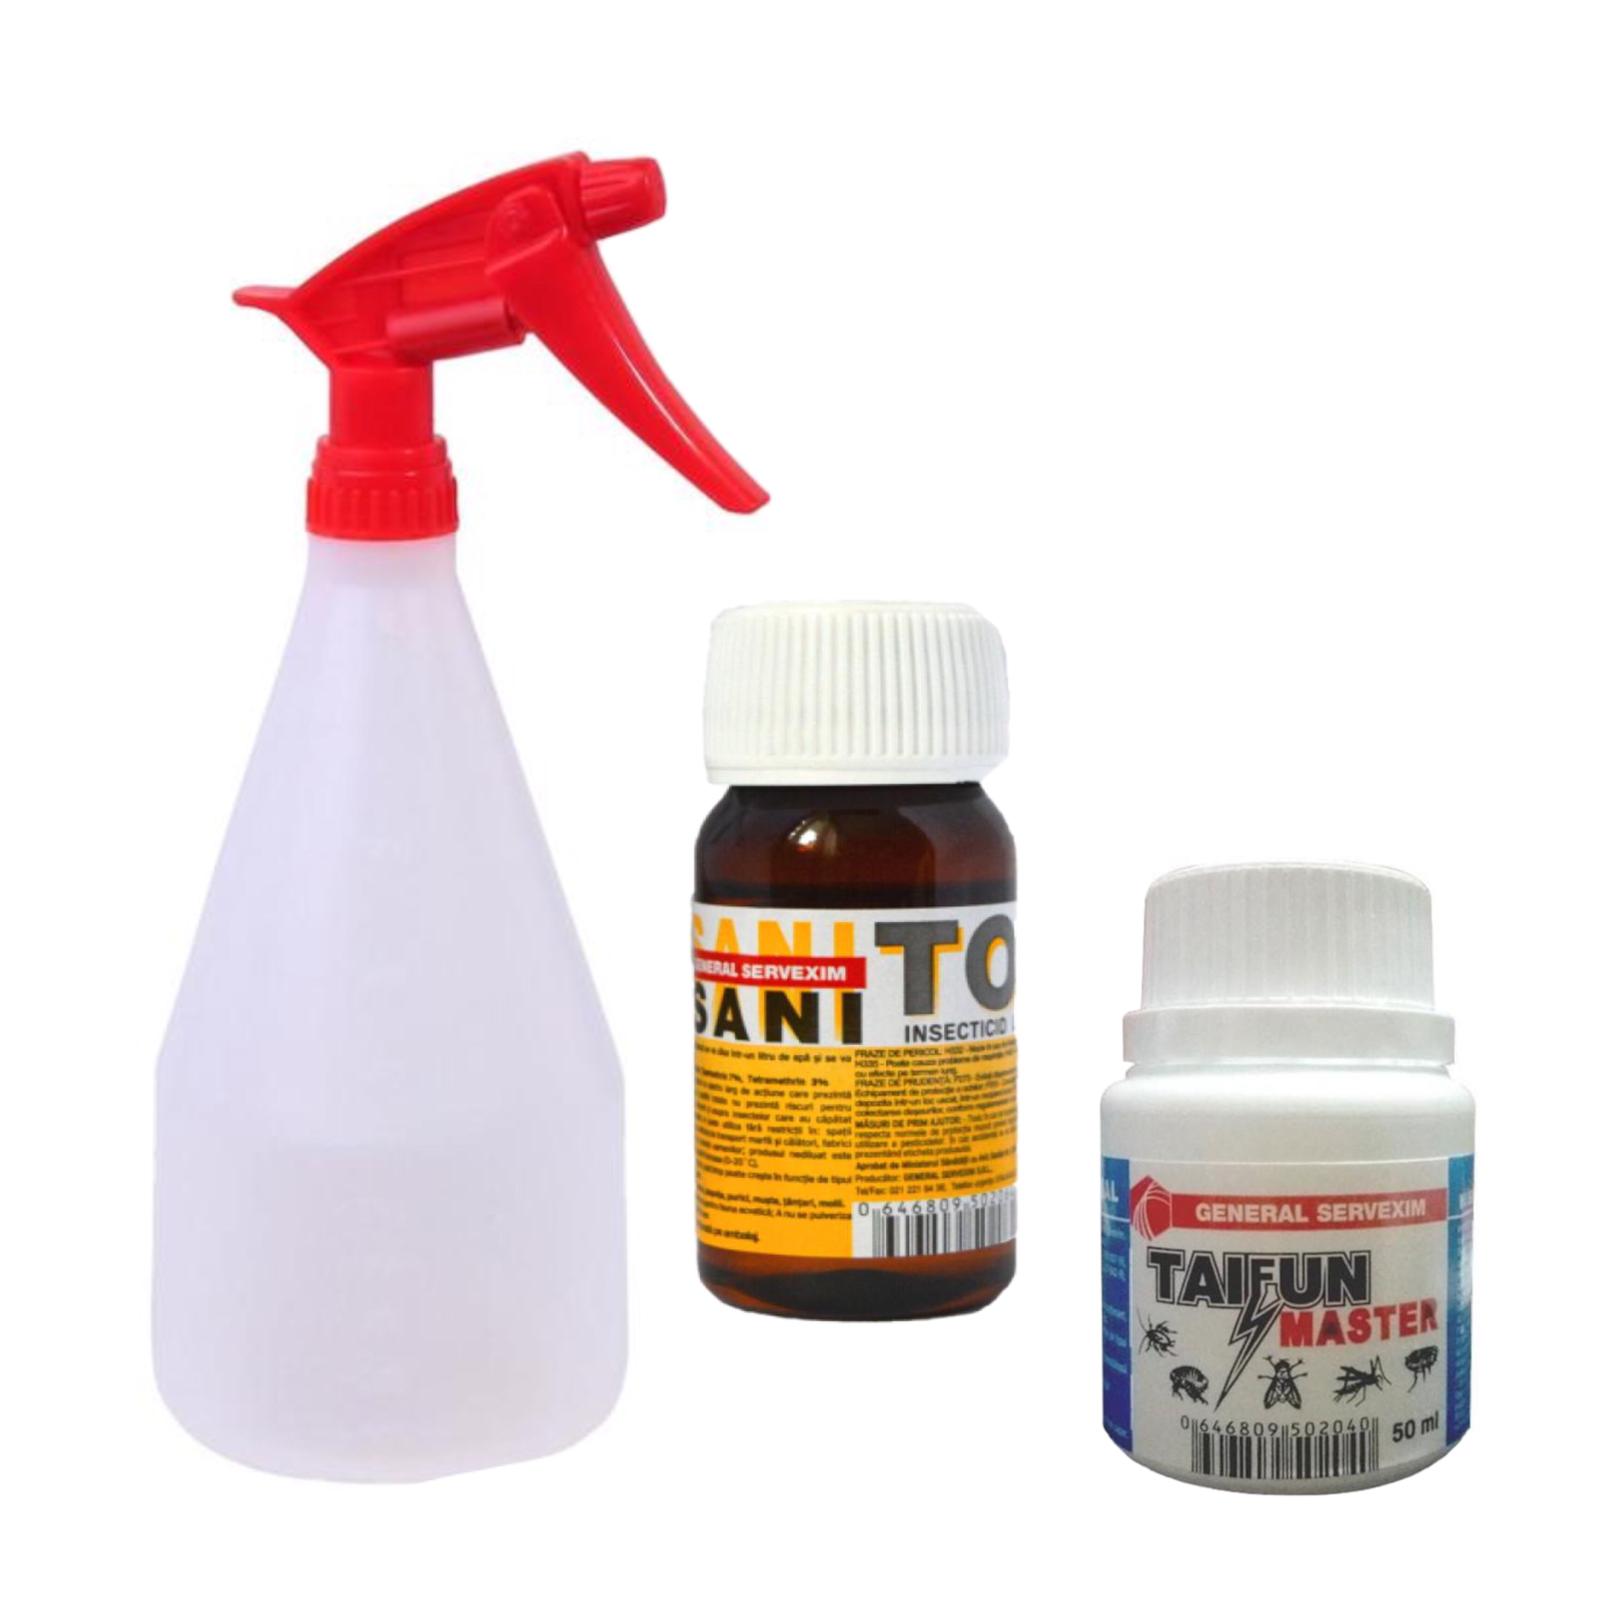 Insecticid universal anti insecte , Sanitox 40 ml +Insecticid universal Taifun 50 ml + cu Pulverizator 1 L